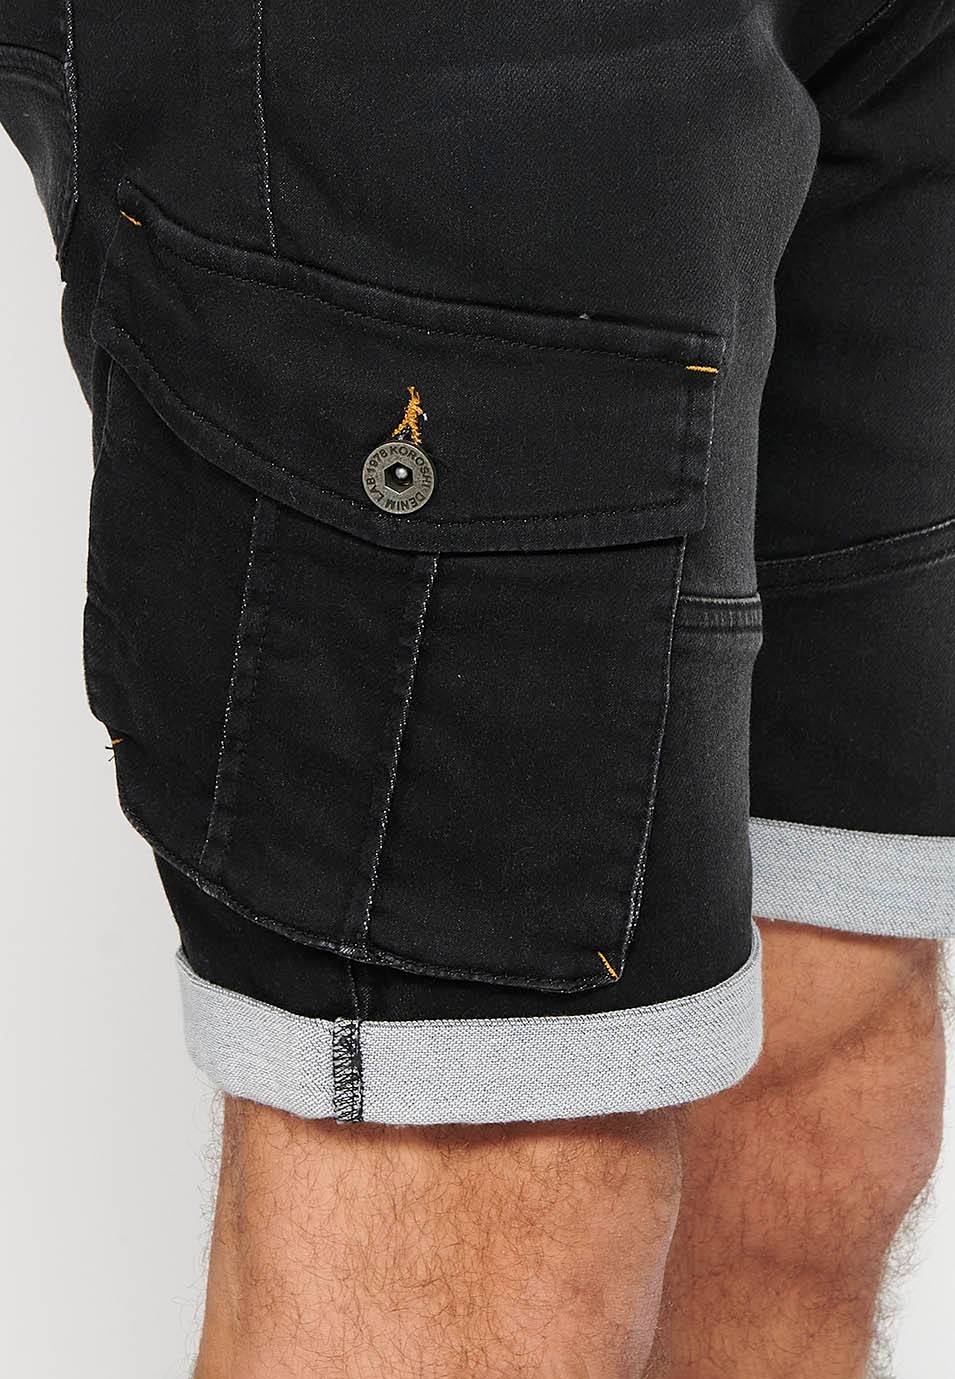 Denim Bermuda cargo jogger shorts finished with a turn-up, Adjustable waist with elastic and drawstring, Side pockets with flap, Black for Men 6